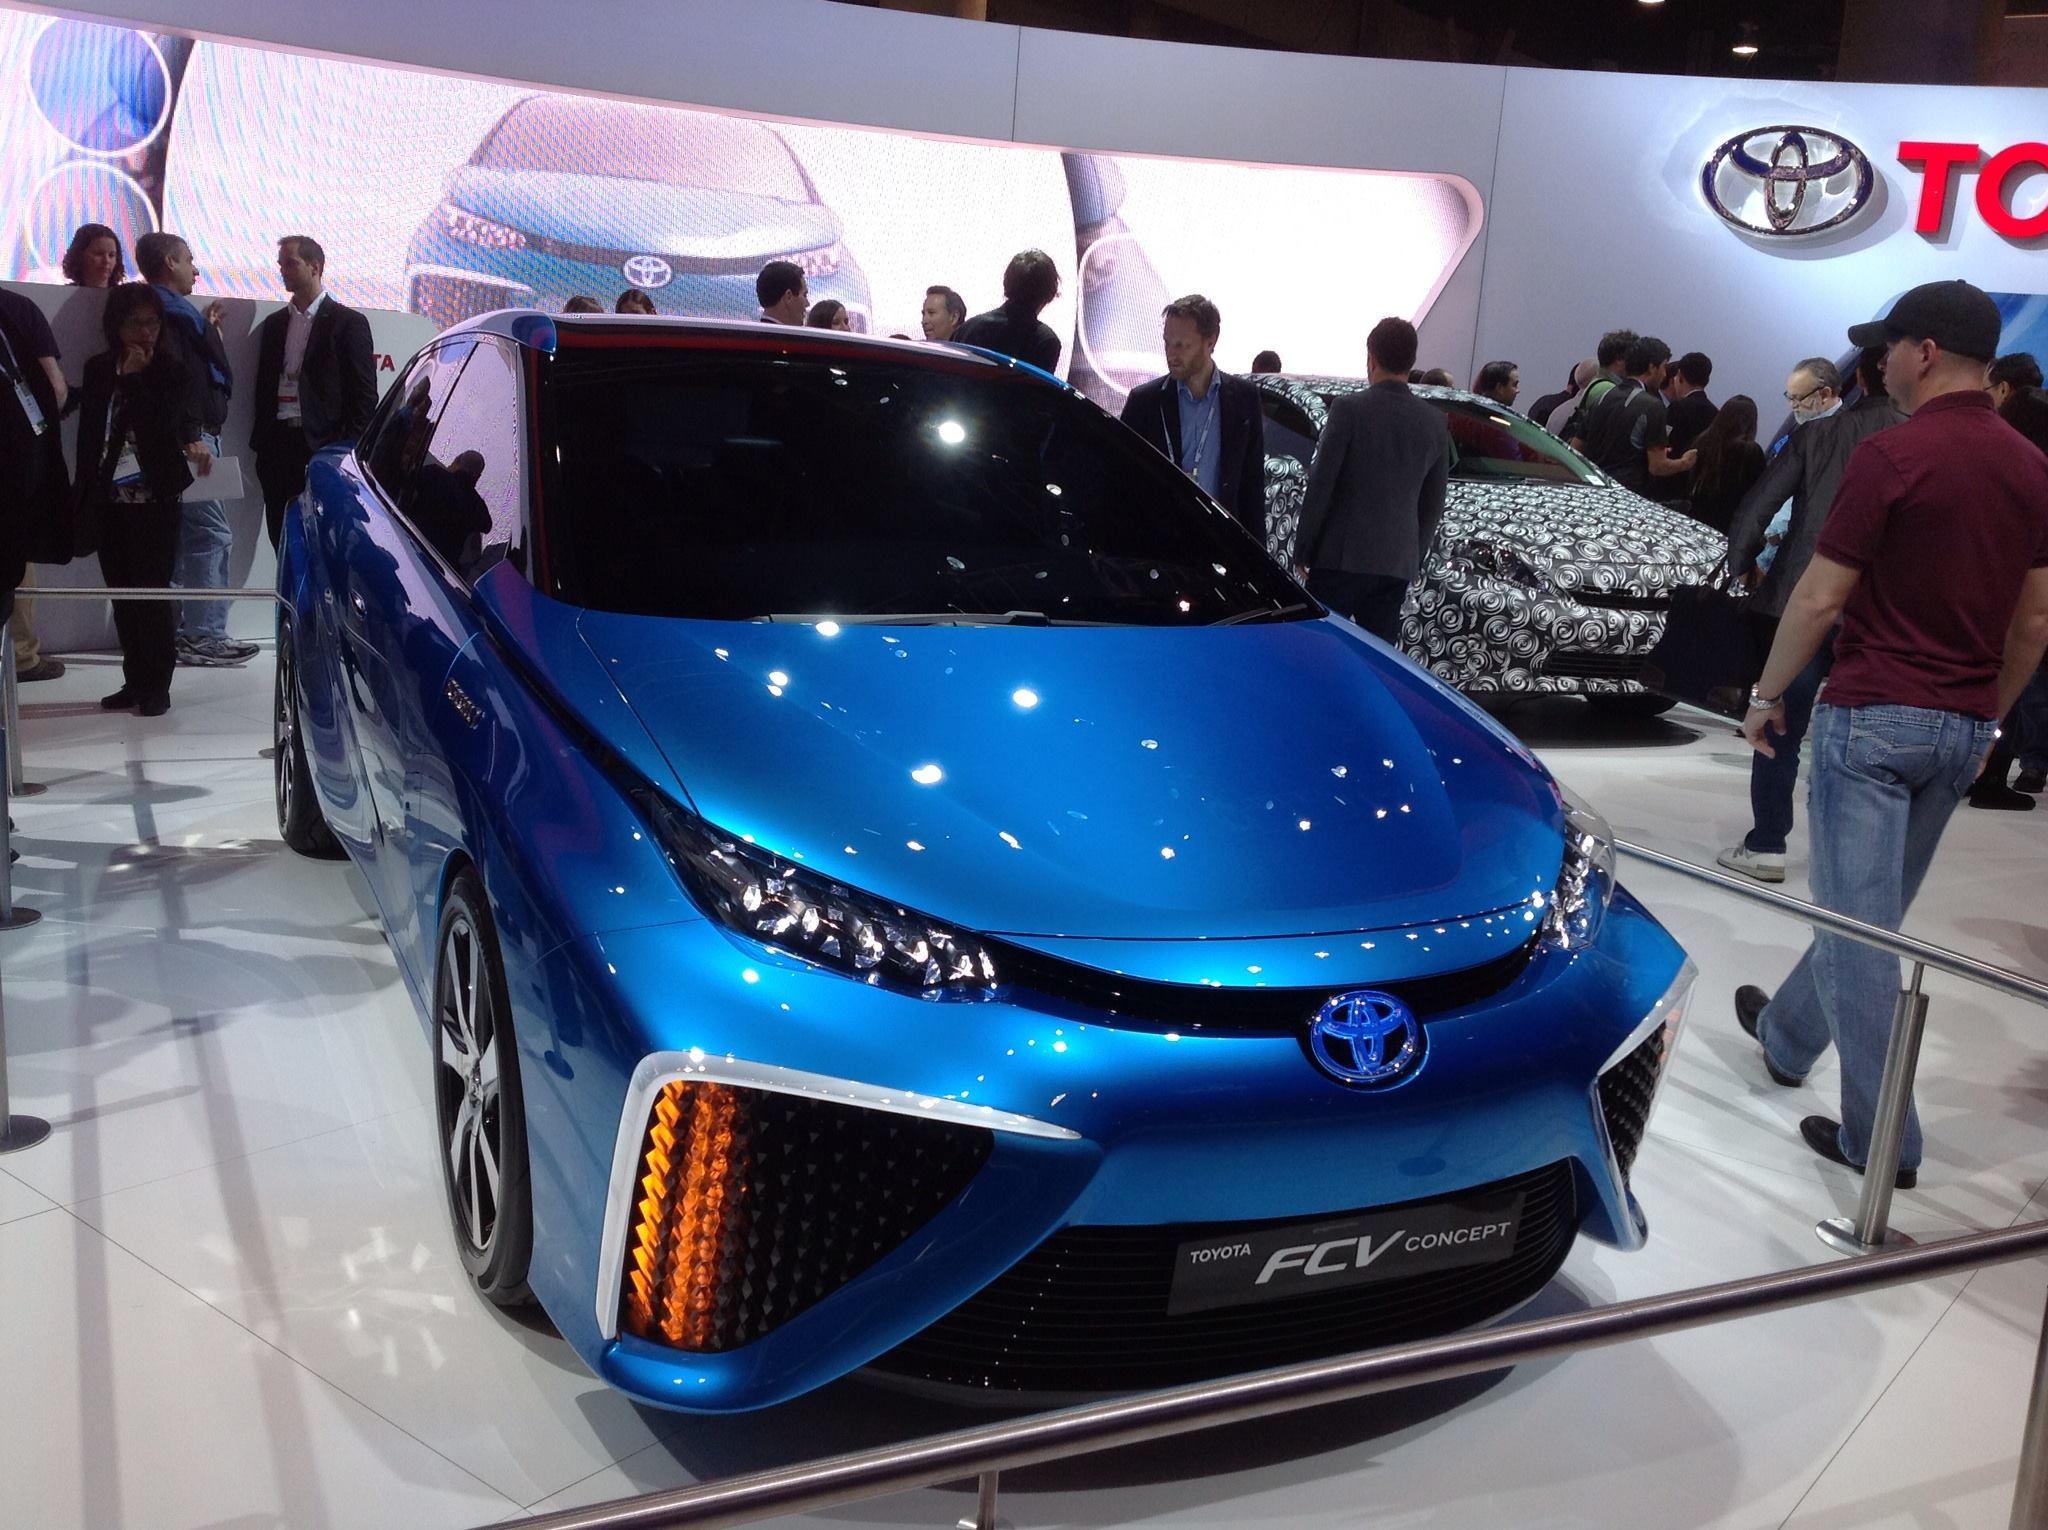 Toyota Fuel Cell Vehicle – hydrogen powered!